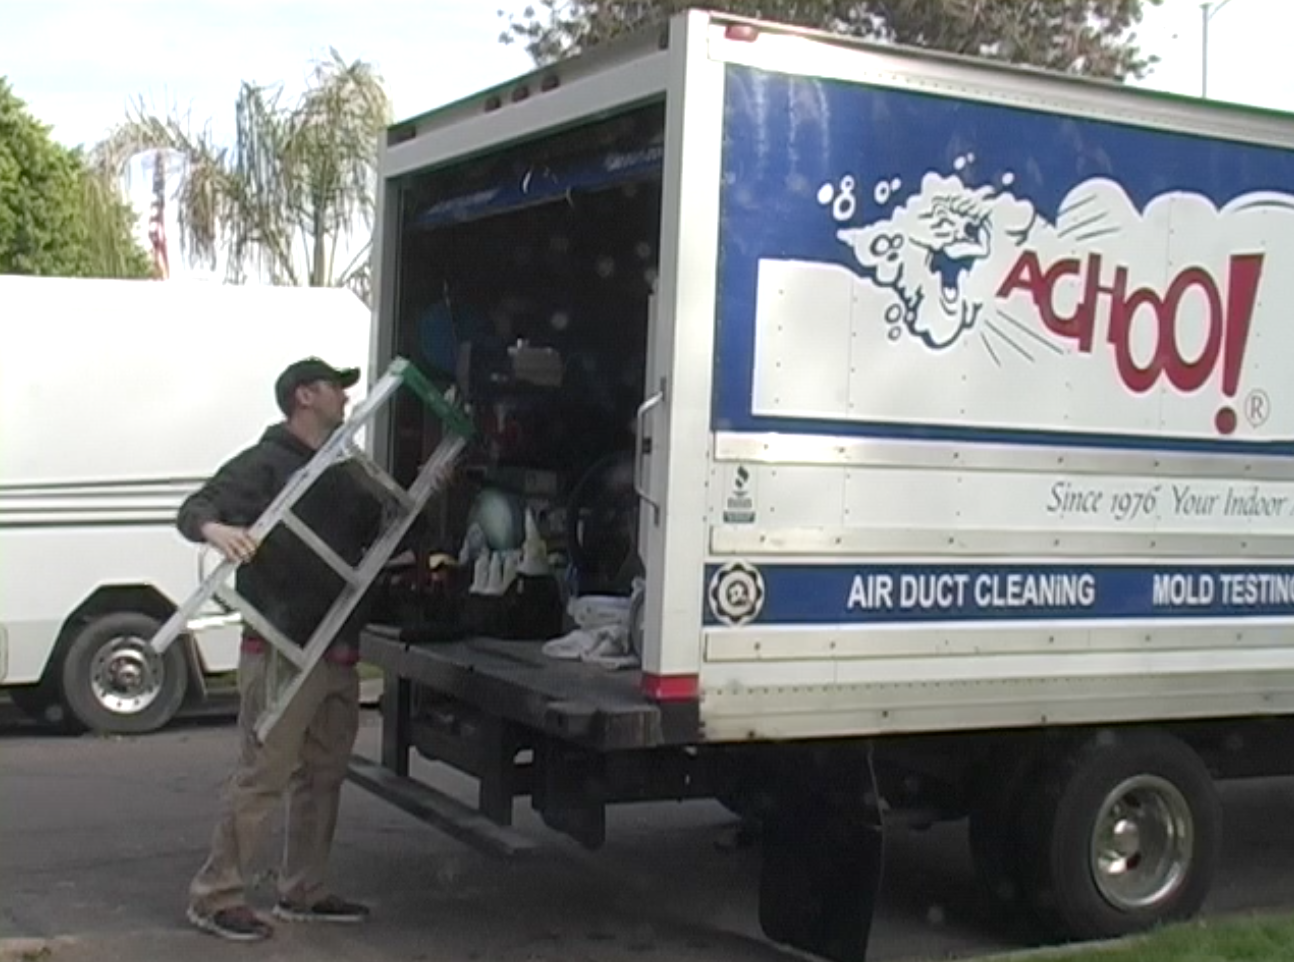 Unloading air duct cleaning equipment for a job in Phoenix.